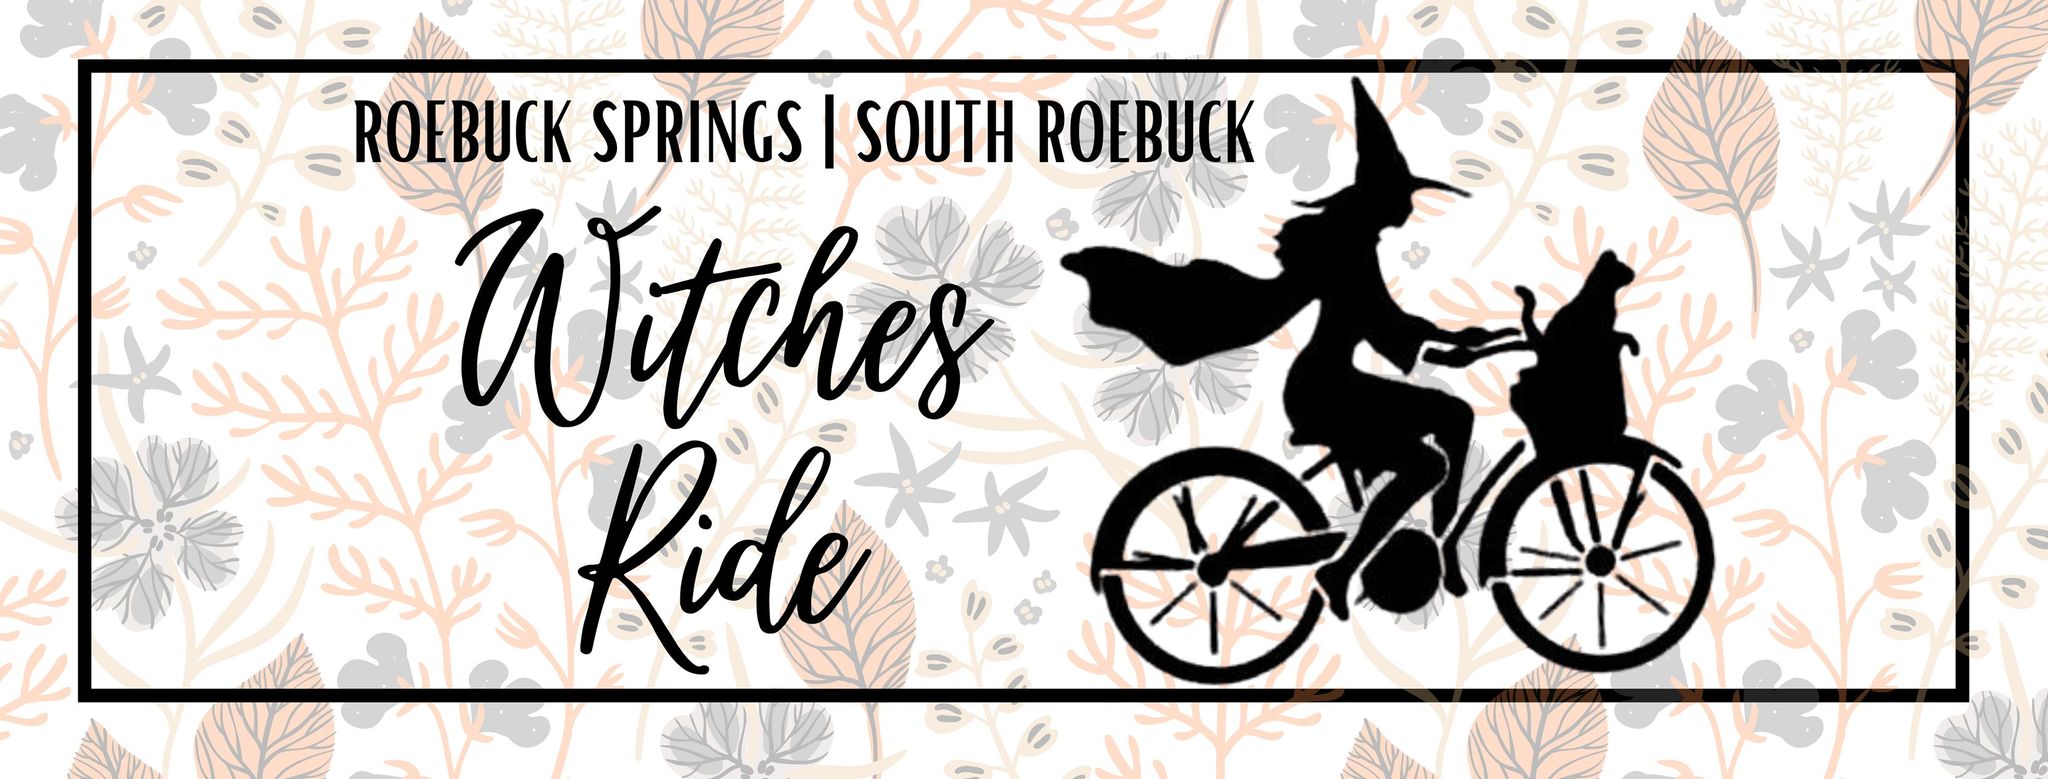 Roebuck Spring / South Roebuck Witches Ride